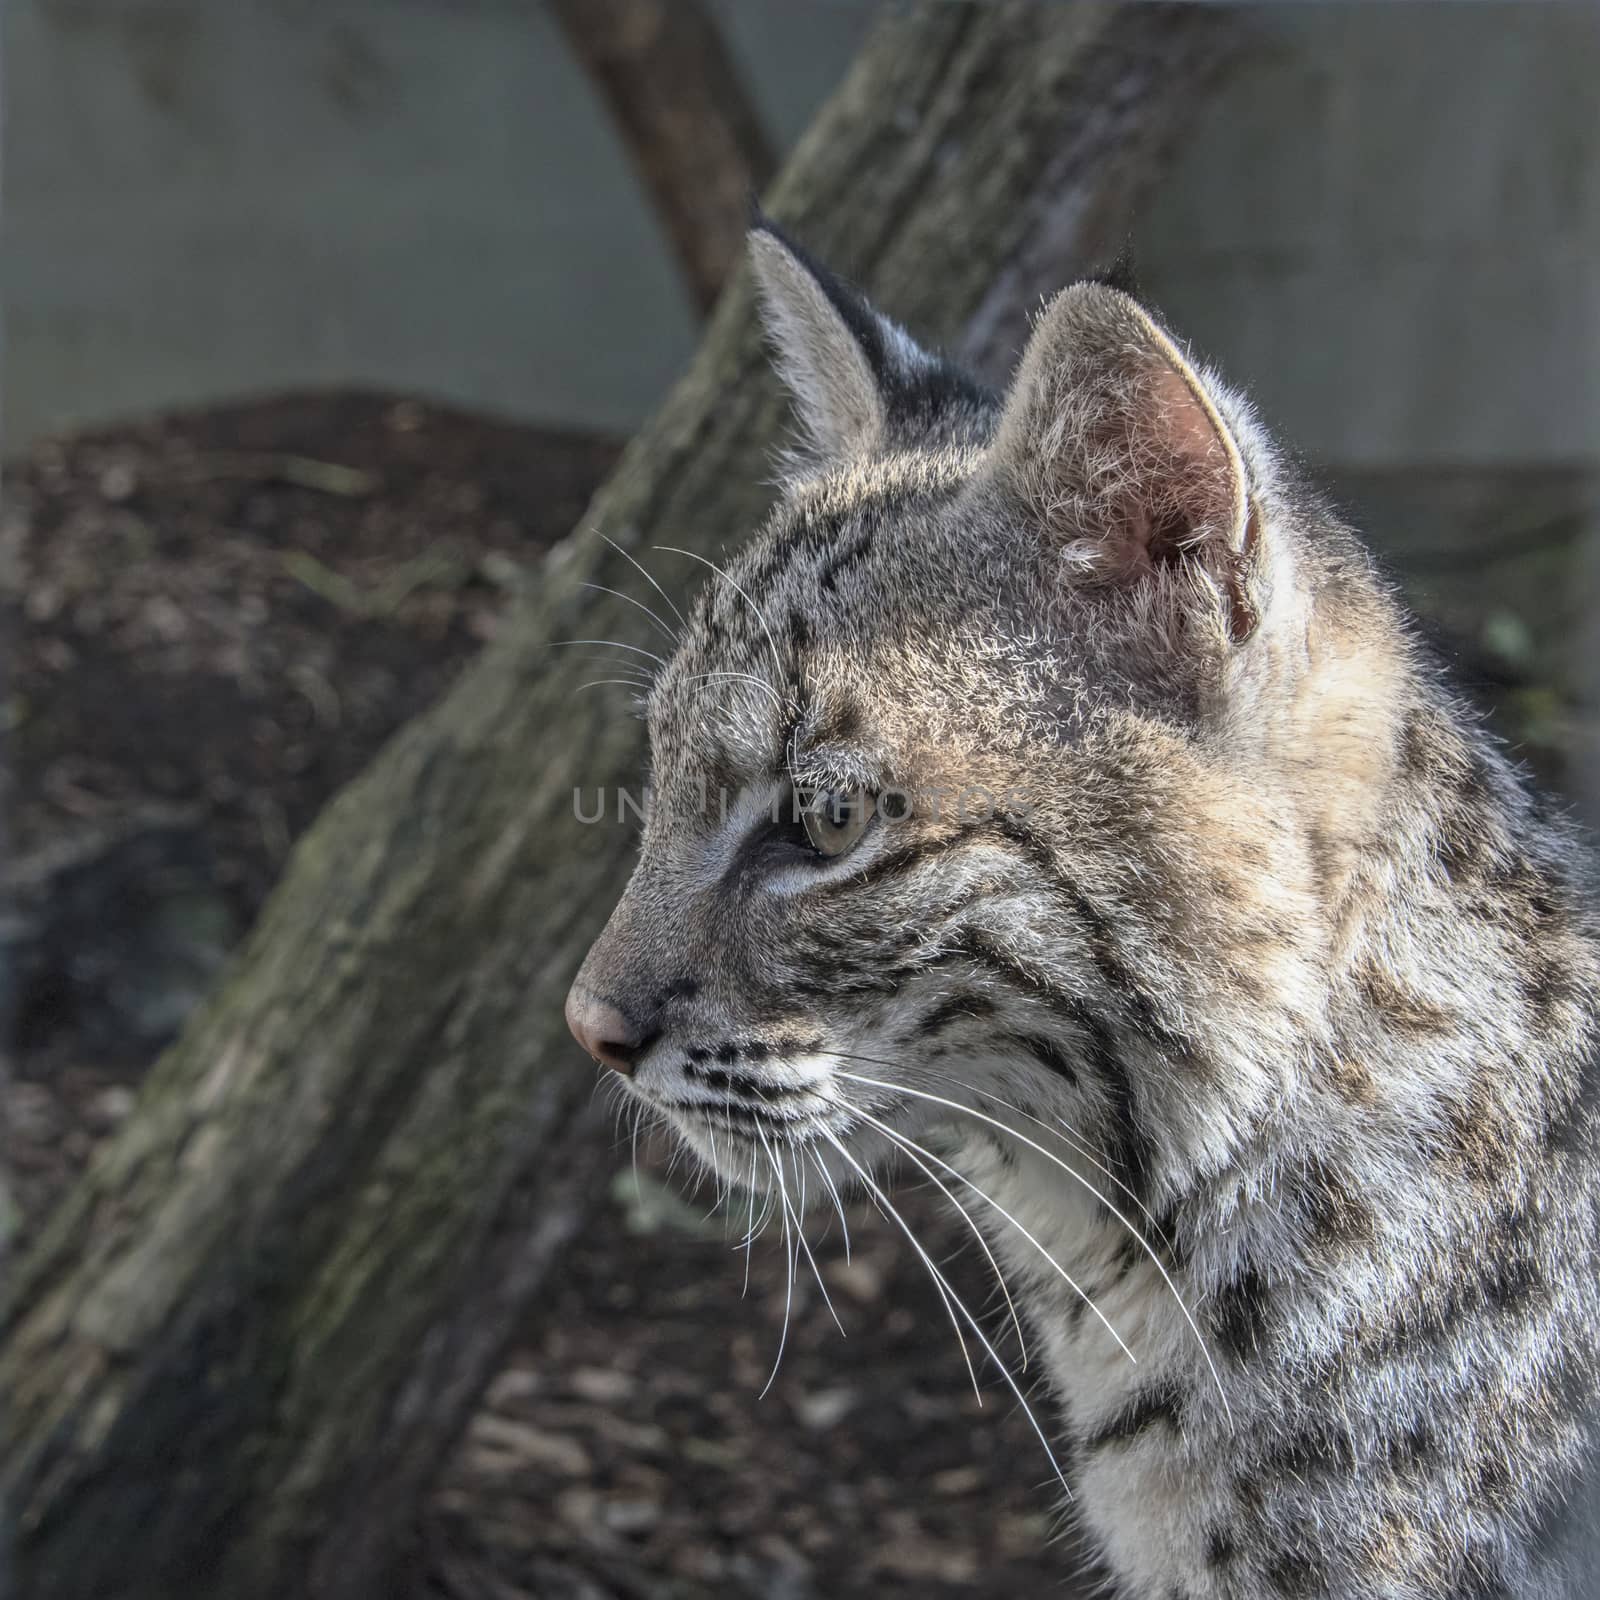 UK, Welwyn - October 2017: Young Bob Cat in captivity -  close up